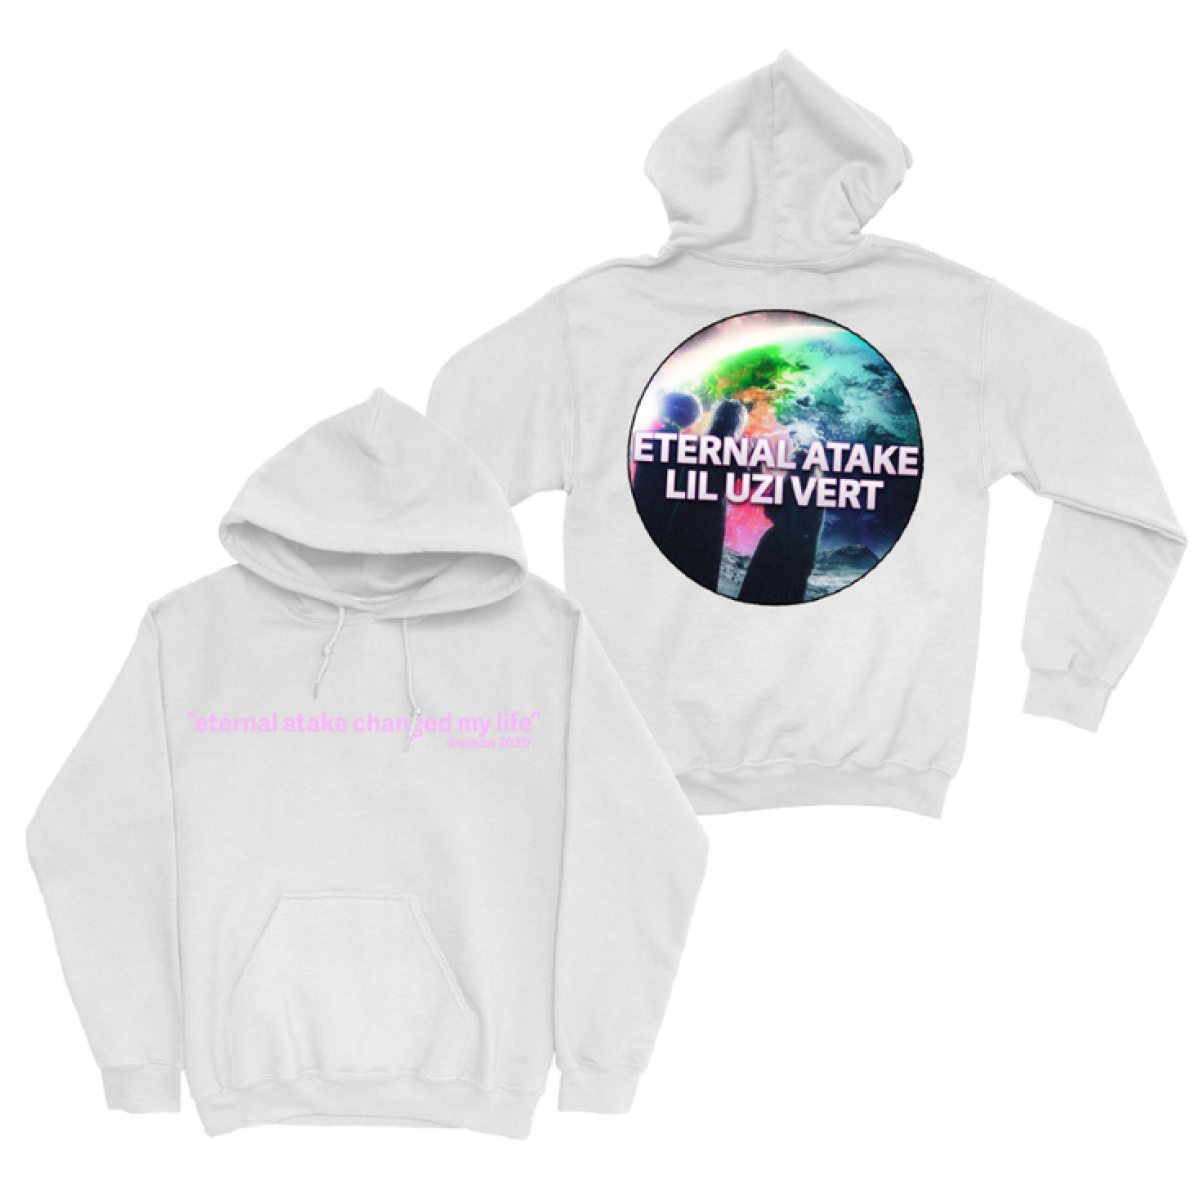 Lil Uzi Vert Releases A Cheeky Collection Of 'Eternal Atake' Merch